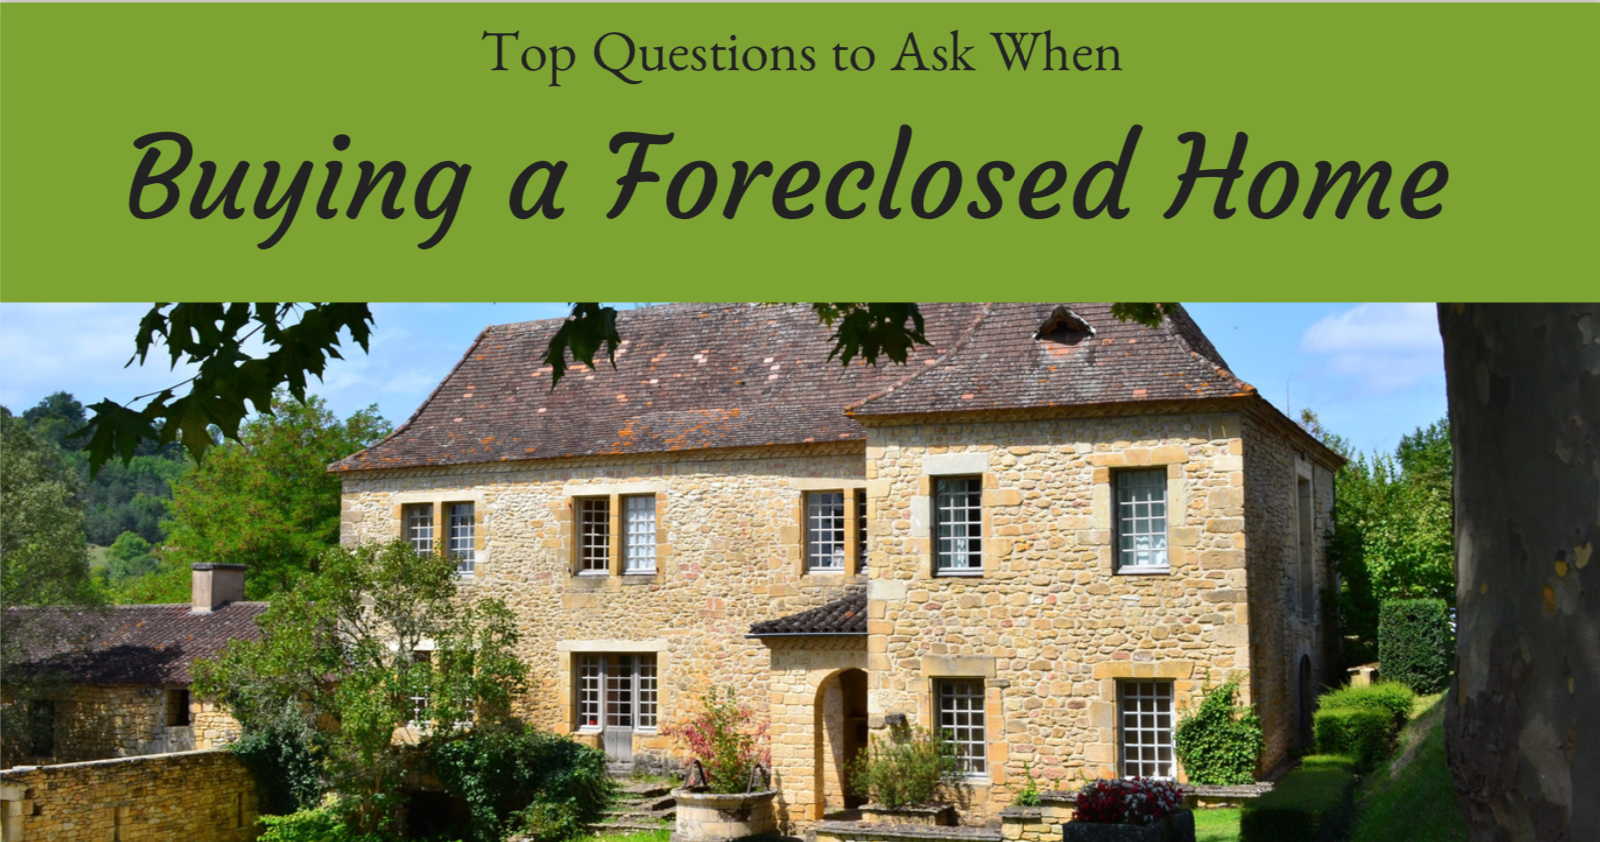 Top Questions to Ask When Buying a Foreclosed Home